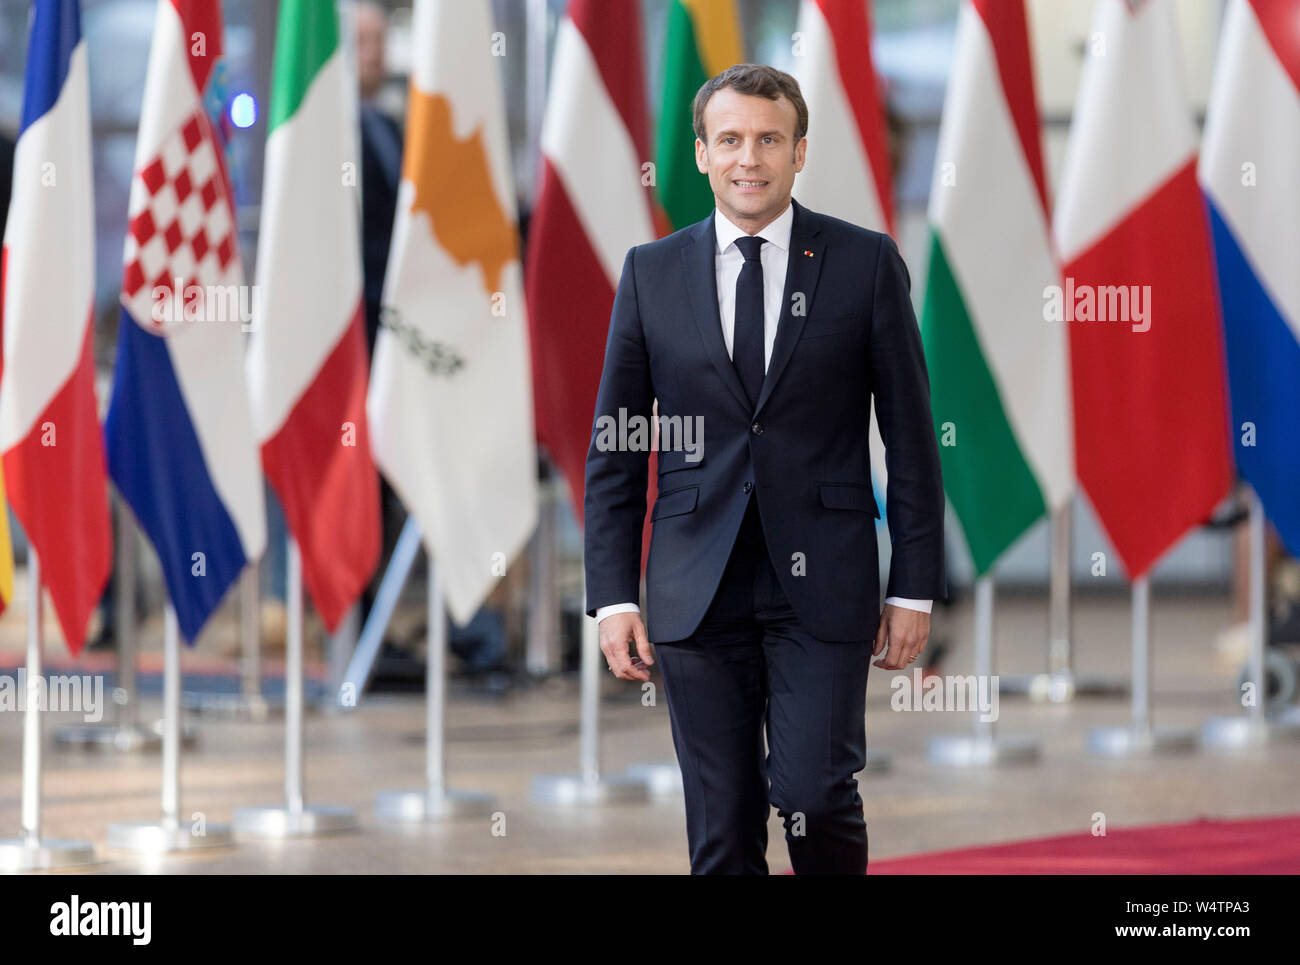 Belgium, Brussels, April 10th, 2019: European summit on Brexit, UK's leave from the European Union. French President Emmanuel Macron in front of EU me Stock Photo